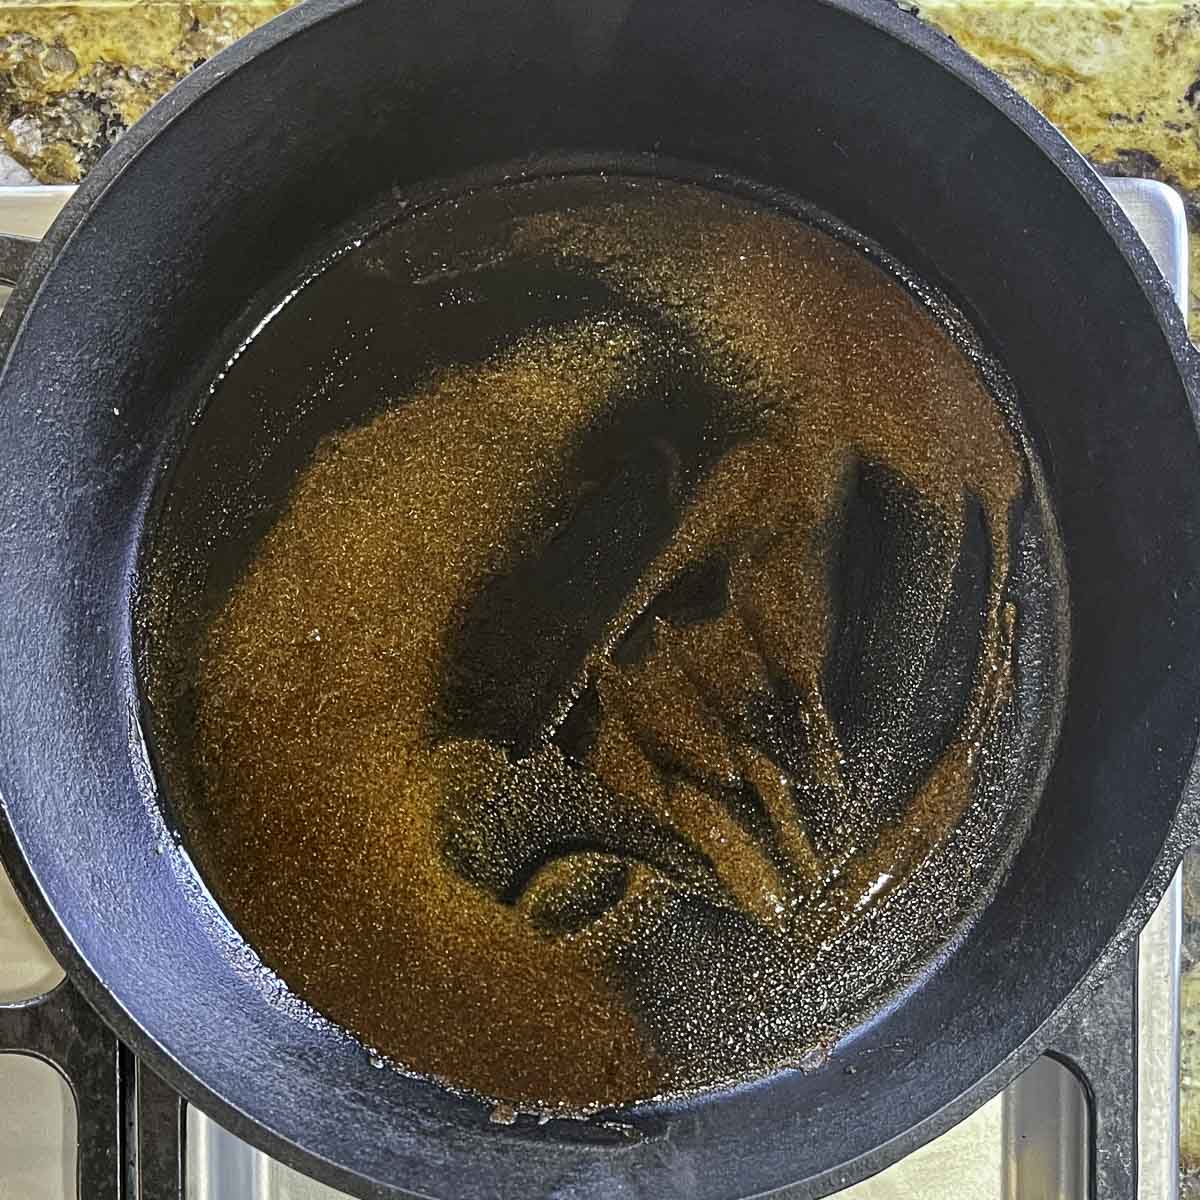 oil and spices in a cast iron skillet